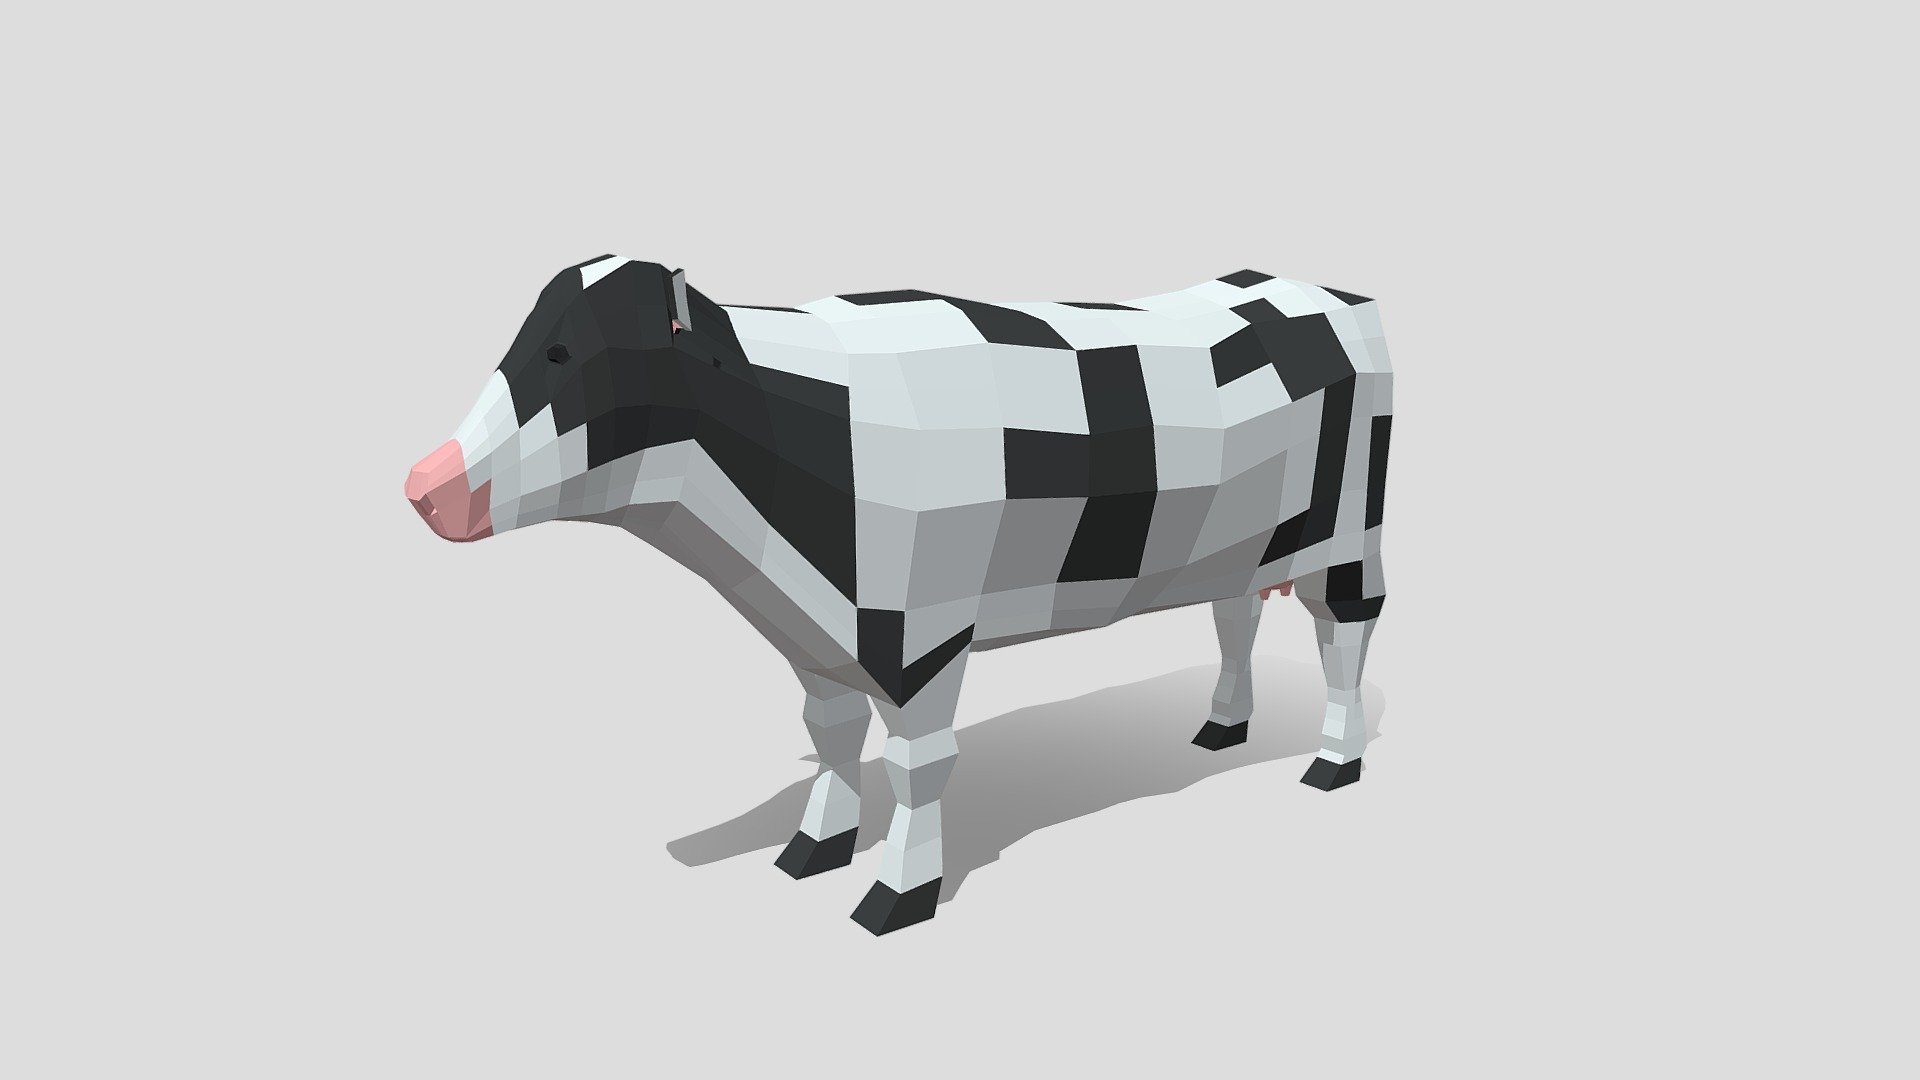 This is a low poly 3d model of a cow. The low poly cow was modelled and prepared for low-poly style renderings, background, general CG visualization.

The 3d cow model is presented as a meshes with quads only.

Verts : 1006 Faces: 1004

Simple diffuse colors.

No ring, maps and no UVW mapping is available.

The original file was created in blender. You will receive a 3DS, OBJ, FBX, blend, DAE, Stl.

All preview images were rendered with Blender Cycles. Product is ready to render out-of-the-box. Please note that the lights, cameras, and background is only included in the .blend file. The model is clean and alone in the other provided files, centred at origin and has real-world scale 3d model